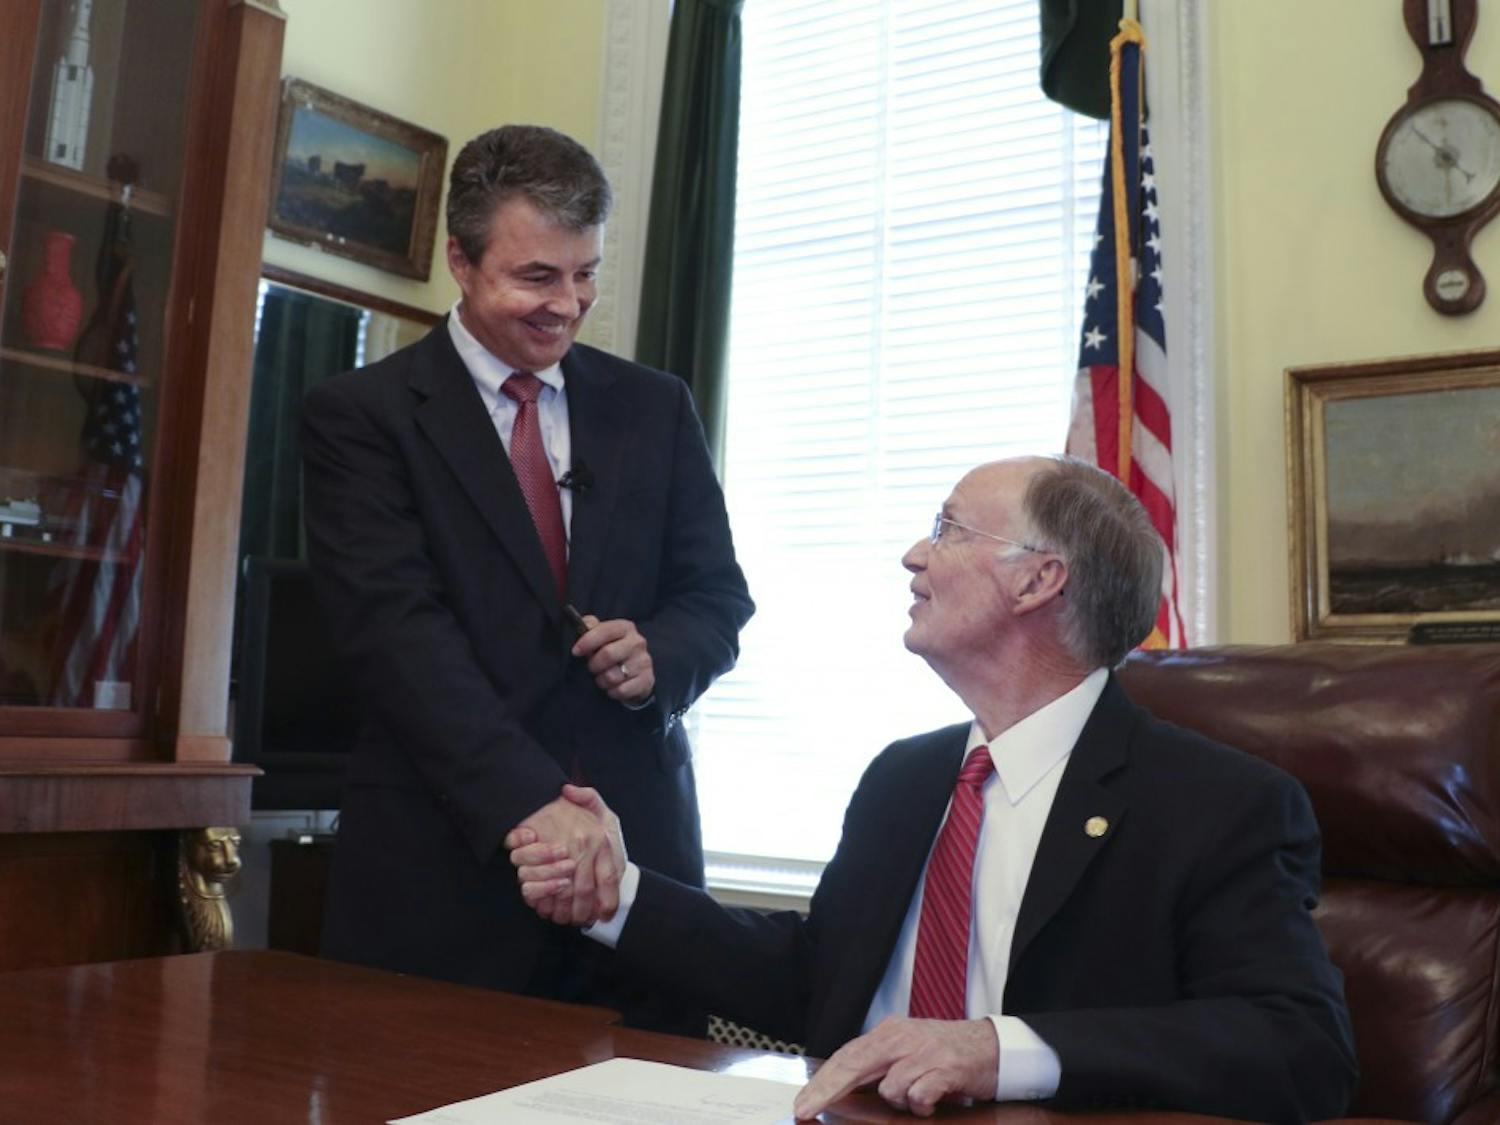 Gov. Robert Bentley shakes hands with new Alabama Attorney General Steve Marshall, after signing his appointment letter at the state Capitol in Montgomery, Friday, Feb. 10, 2017. Marshall has served as the district attorney in Marshall County in north Alabama, appointed to the post in 2001 and re-elected three times. He is a past president of the Alabama District Attorney's Association and currently serves as commission chairman of the Alabama Criminal Justice Information Center.(Governor's Office, Jamie Martin) 